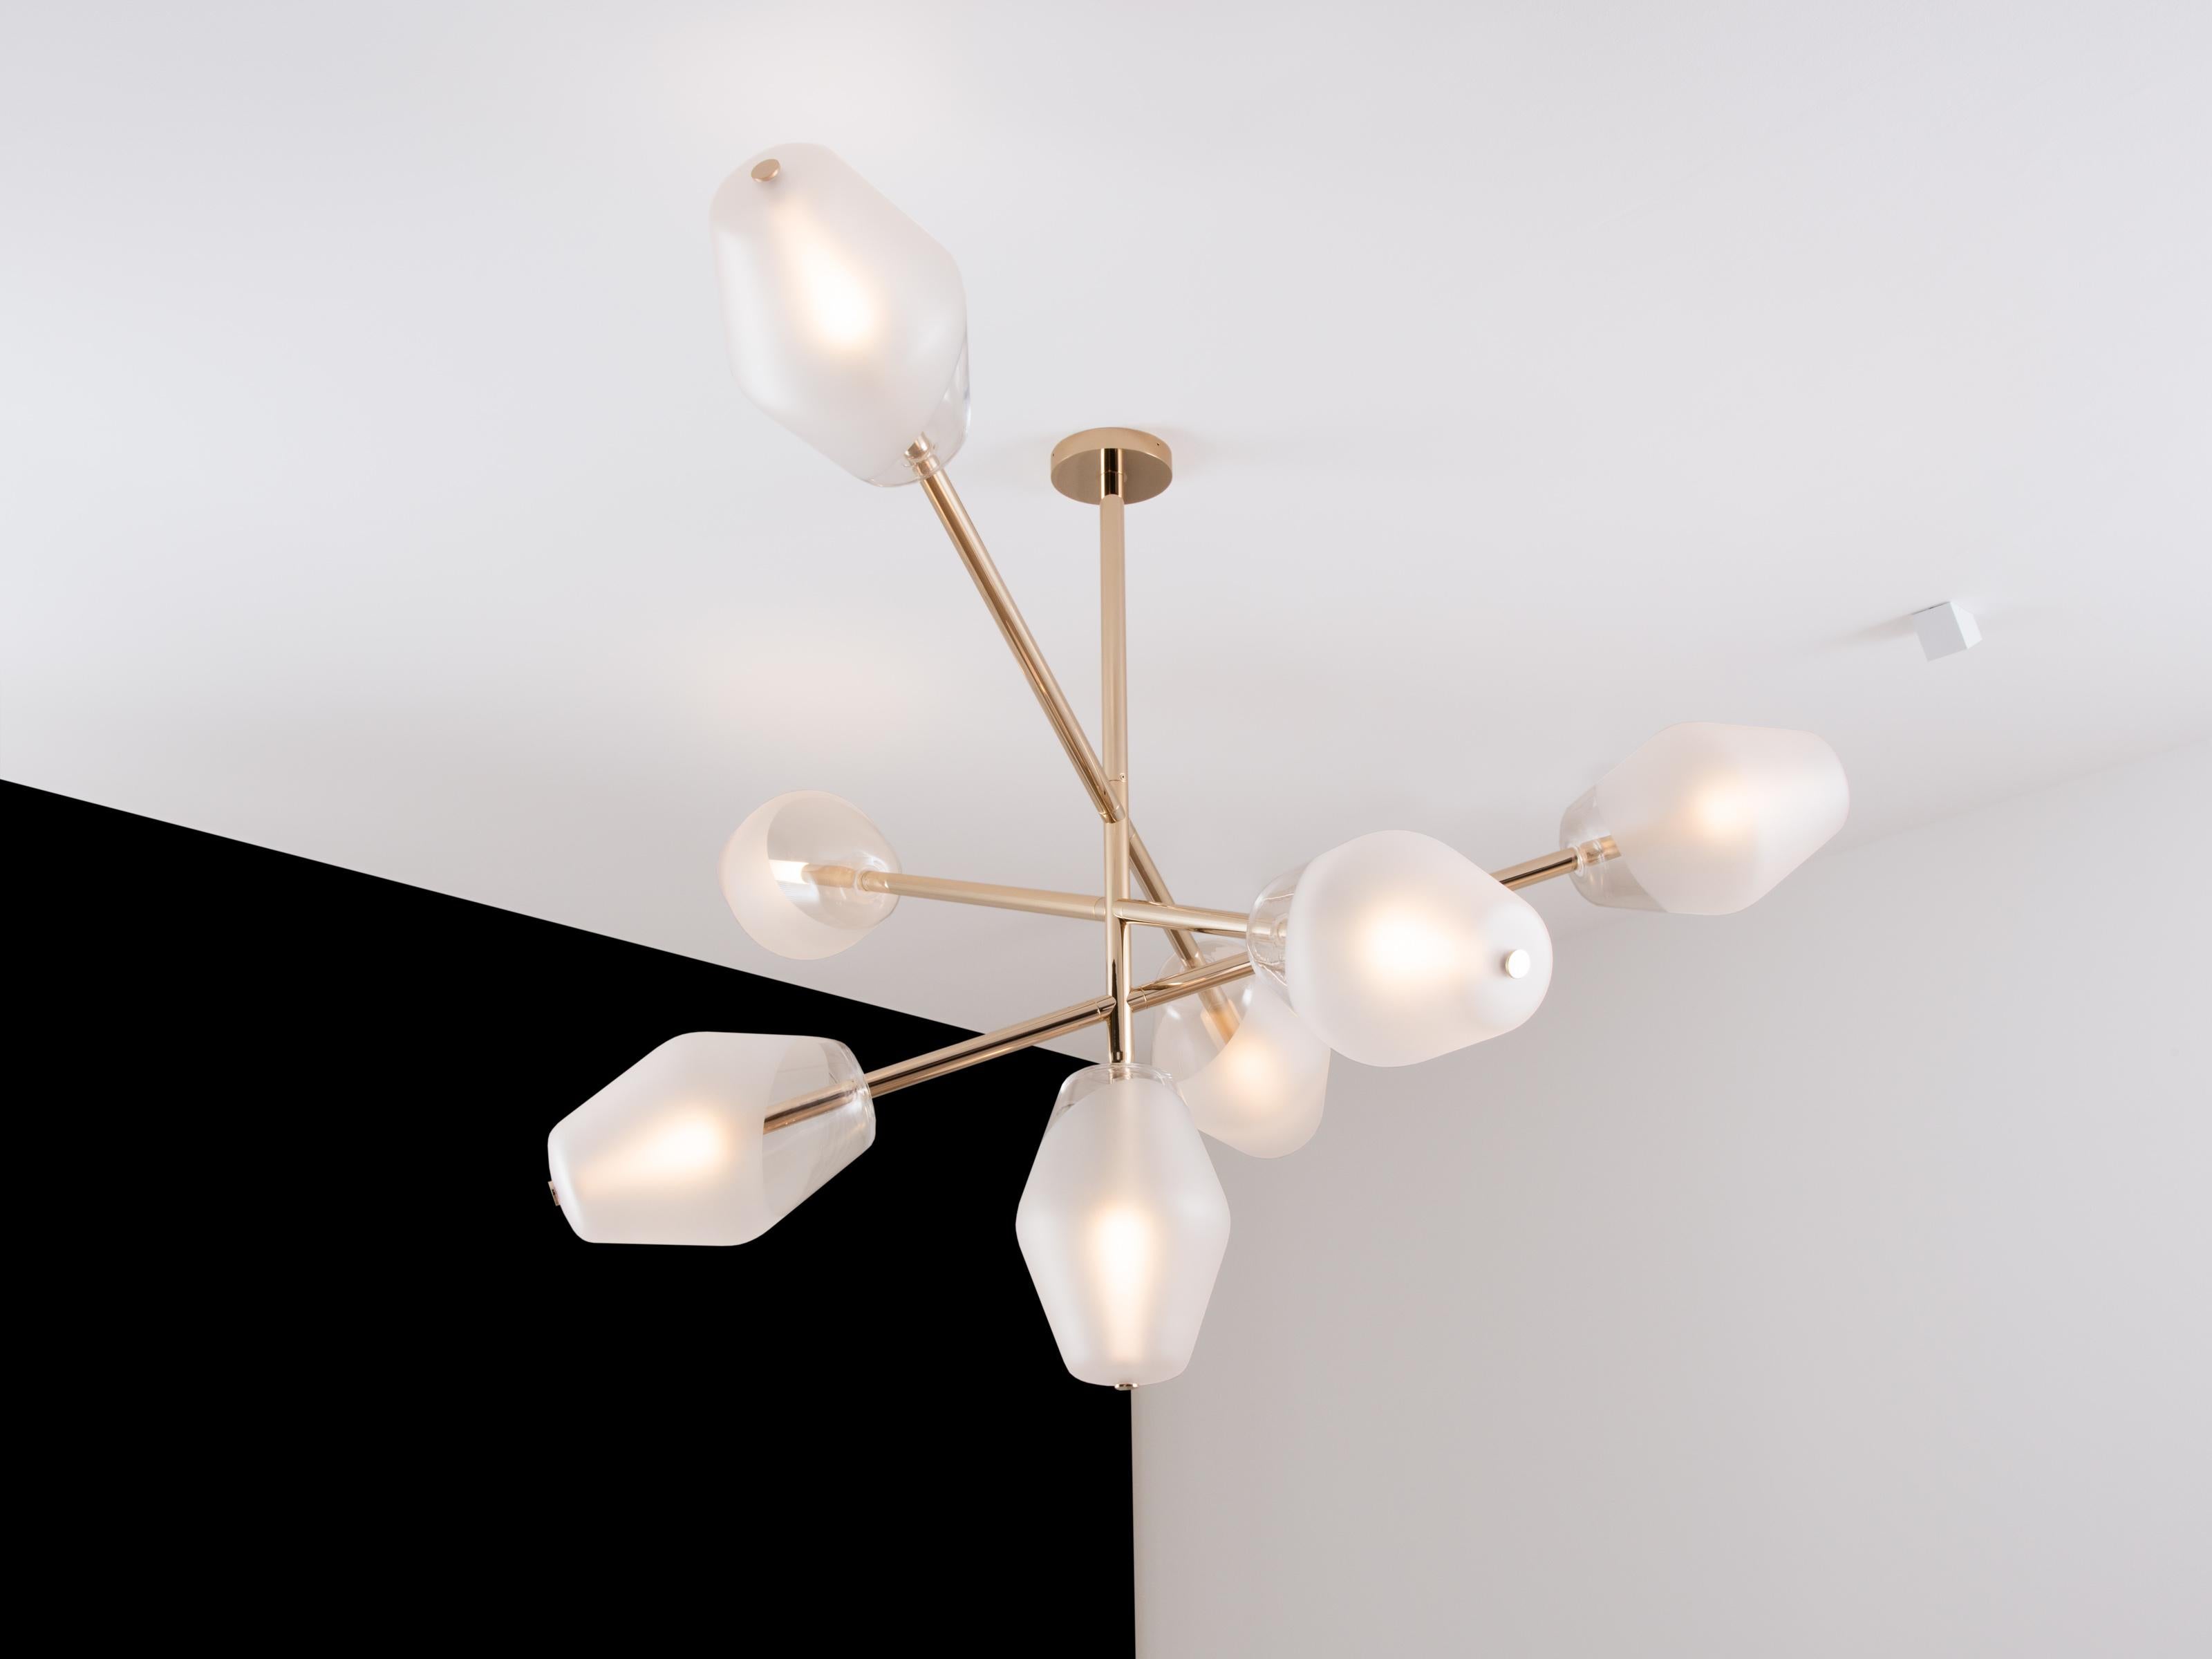 Ozone L'Opera Les Parisienne chandelier. Parisienne O seven light
chandelier is inspired by the Parisian street lights, Régis Botta designed the chandelier with lantern style fixtures to create ambient, warm light. The aluminum with mirror pale